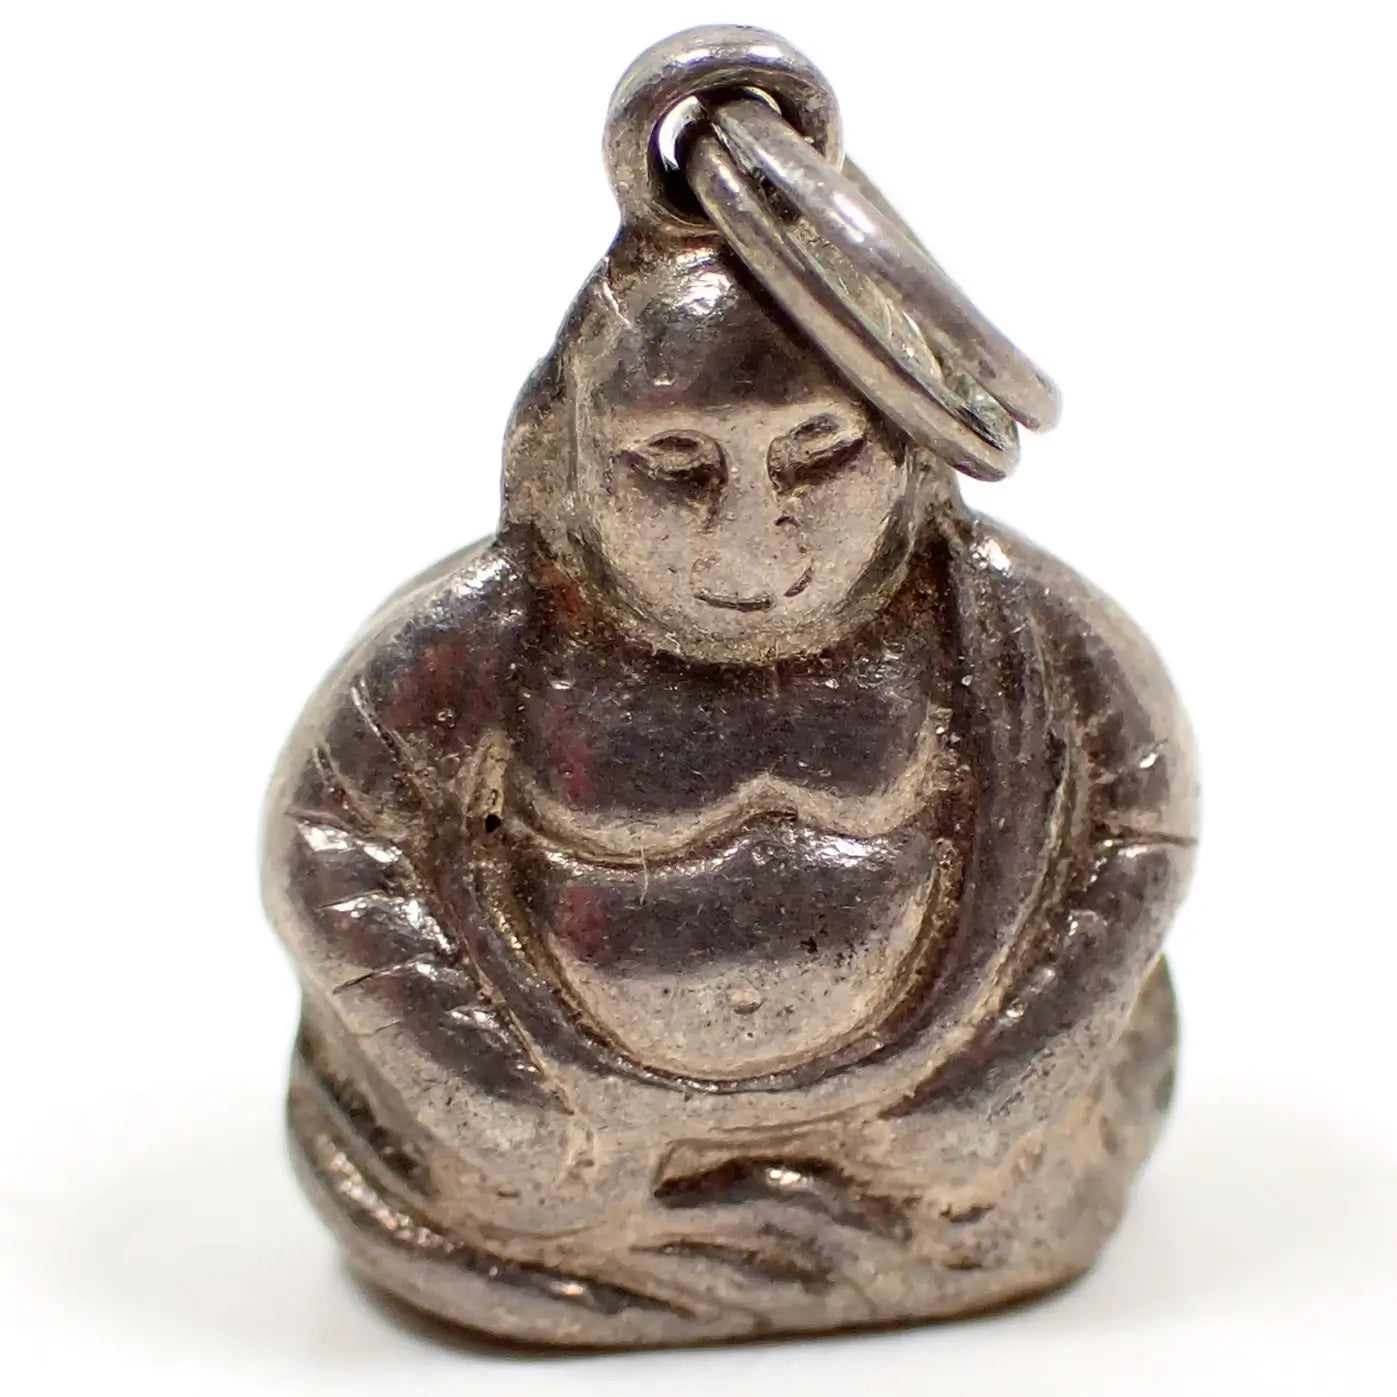 Enlarged front view of the small retro vintage Buddha charm. It is antiqued silver tone in color. There is a loop at the top with a small split jump ring attached to it. The Buddha's face has some rub wear for loss of detail over the years.